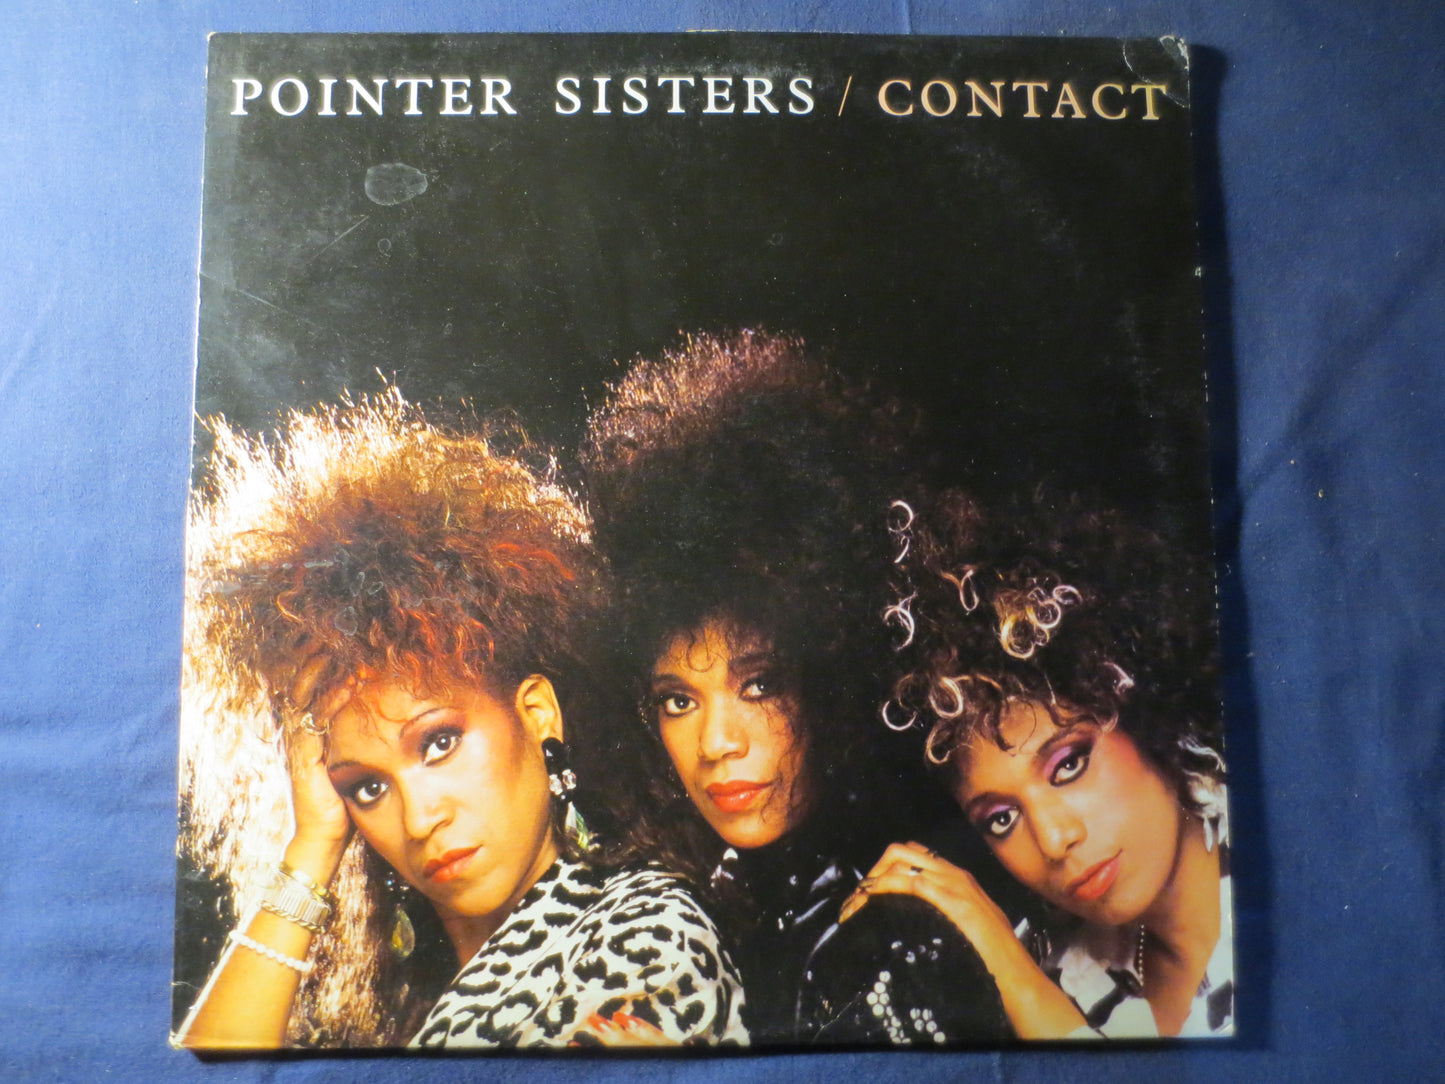 The POINTER SISTERS, CONTACT, Pop Record, Vintage Vinyl, Record Vinyl, Record, Vinyl Record, Vinyl, Vinyl Lp, 1985 Records